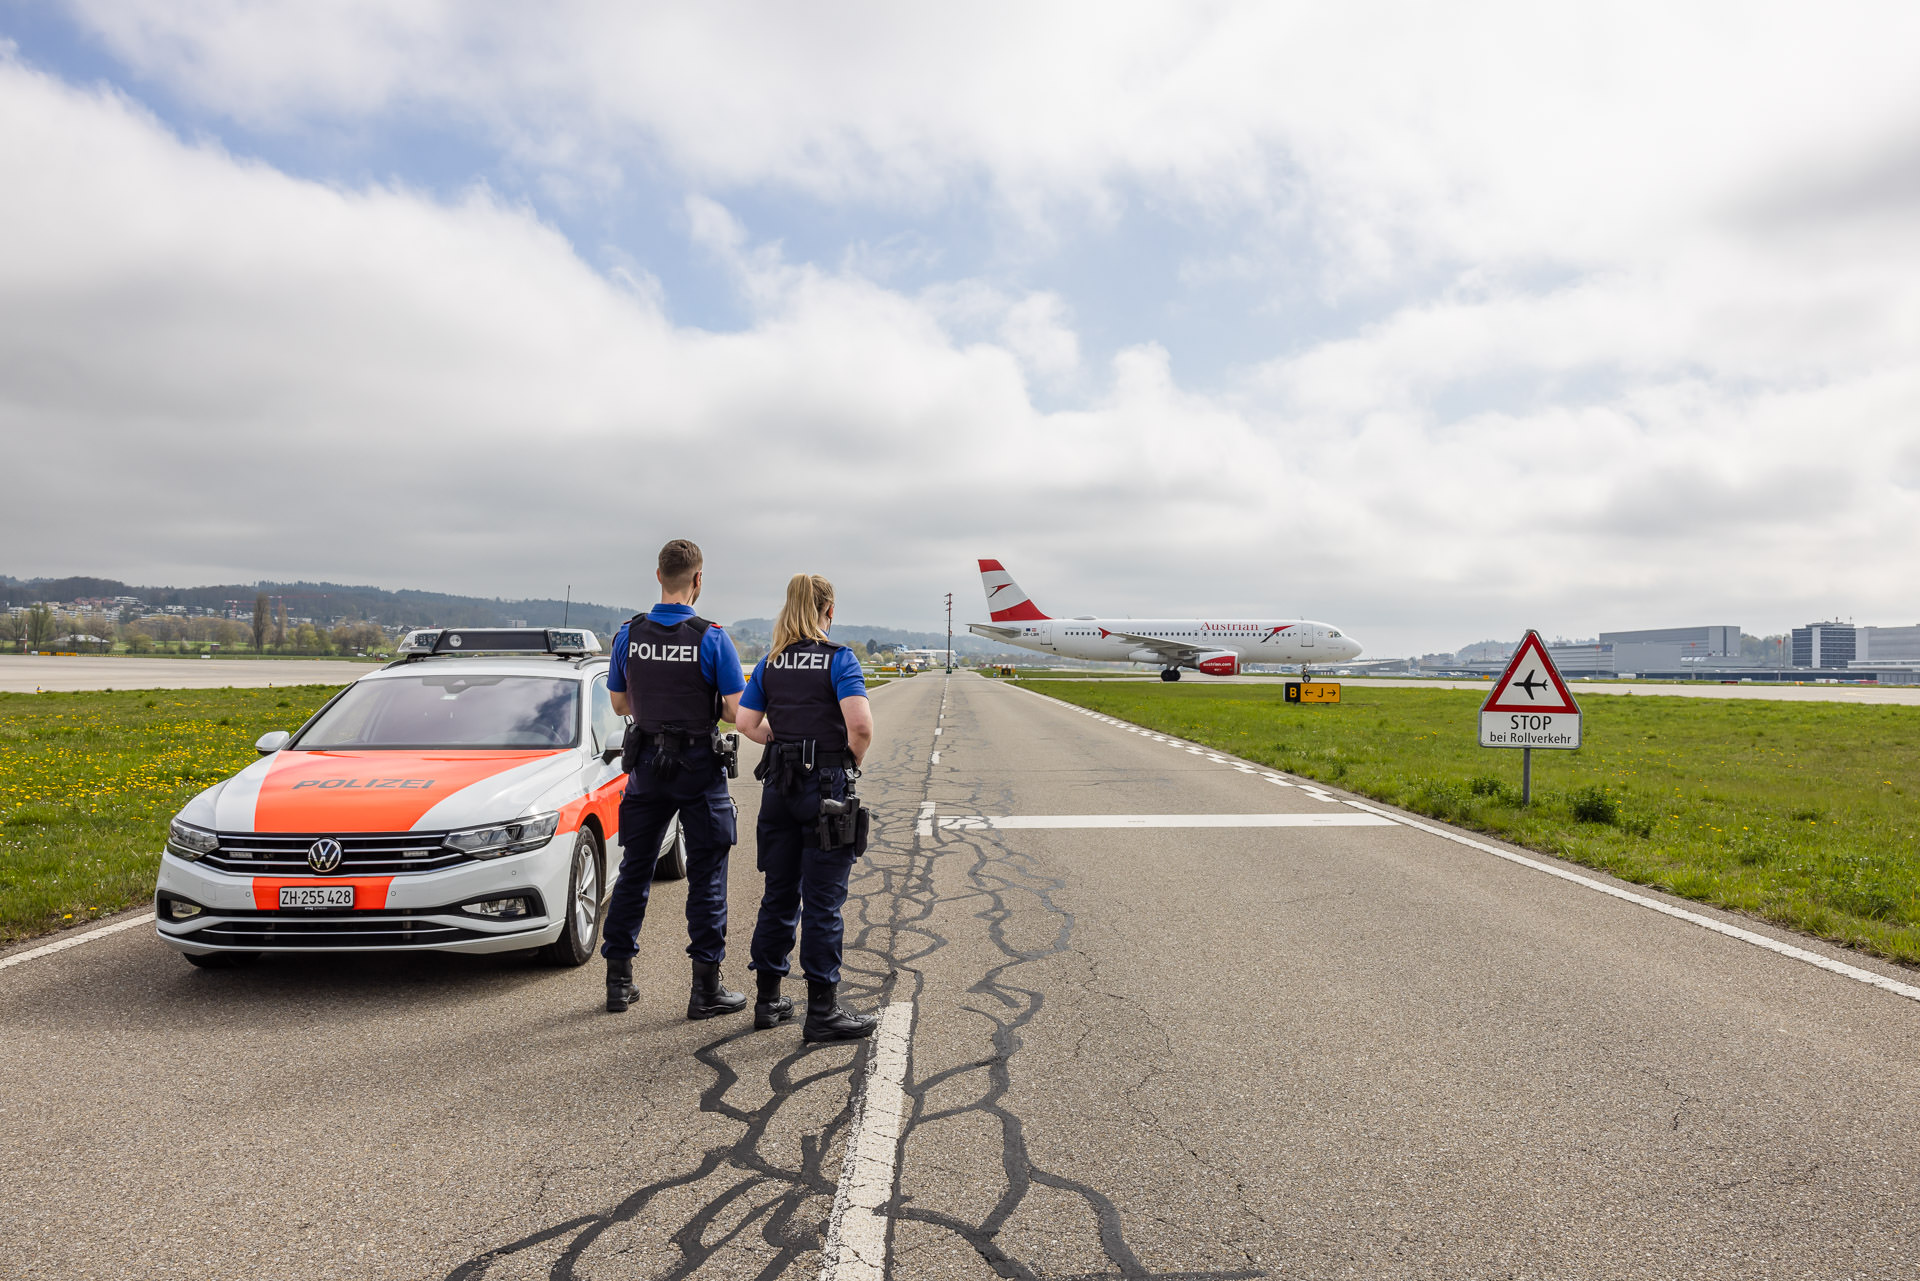 Police for security and safety at Zurich Airport